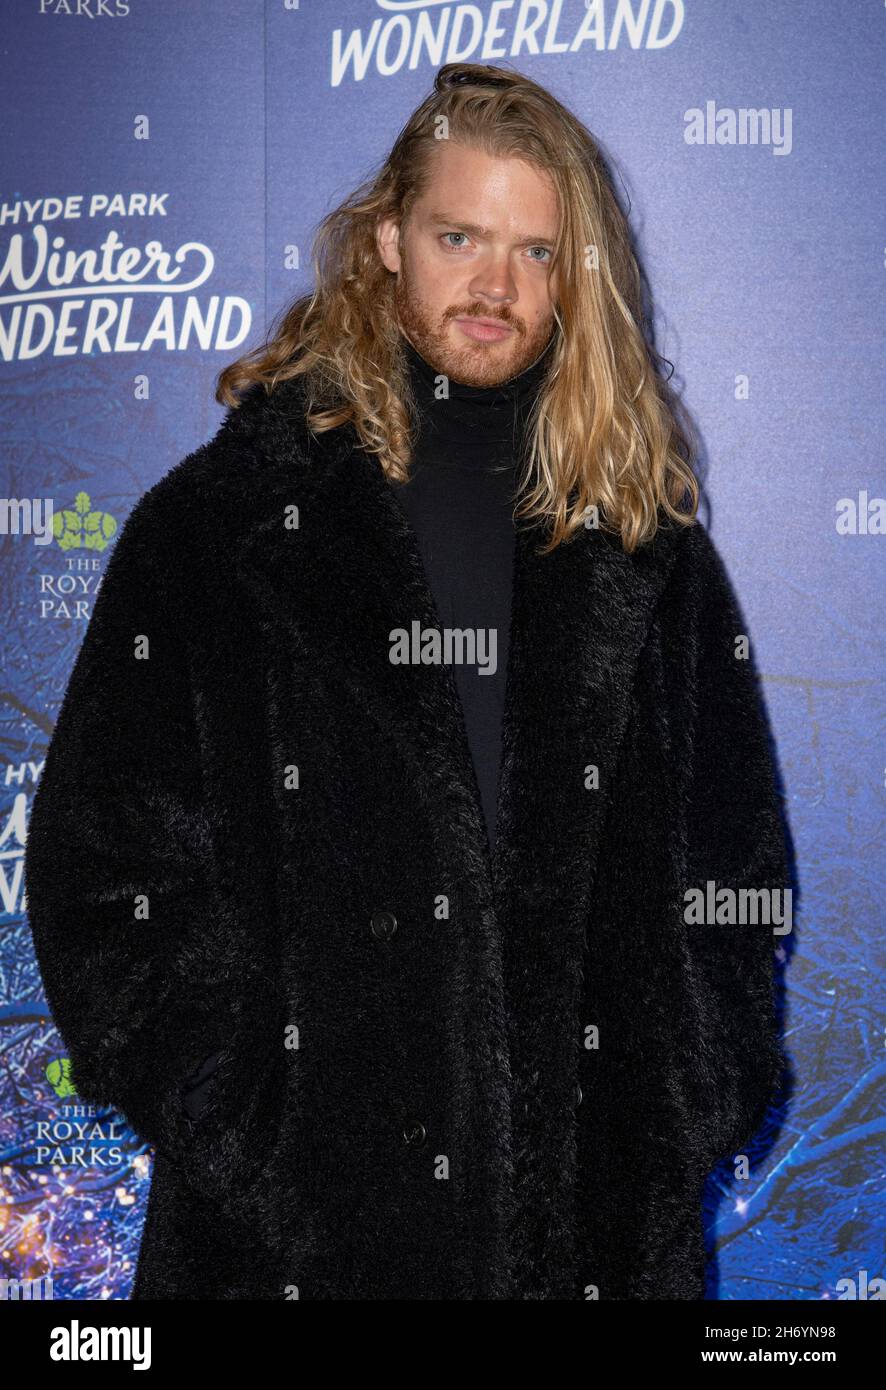 London, UK. 18th Nov, 2021. LONDON, ENGLAND - NOVEMBER 18: Fredrik Ferrier attends the VIP Preview evening of Hyde Park Winter Wonderland at Hyde Park on 18th November 2021 in London, England. Photo Gary Mitchell/Alamy Live News Stock Photo